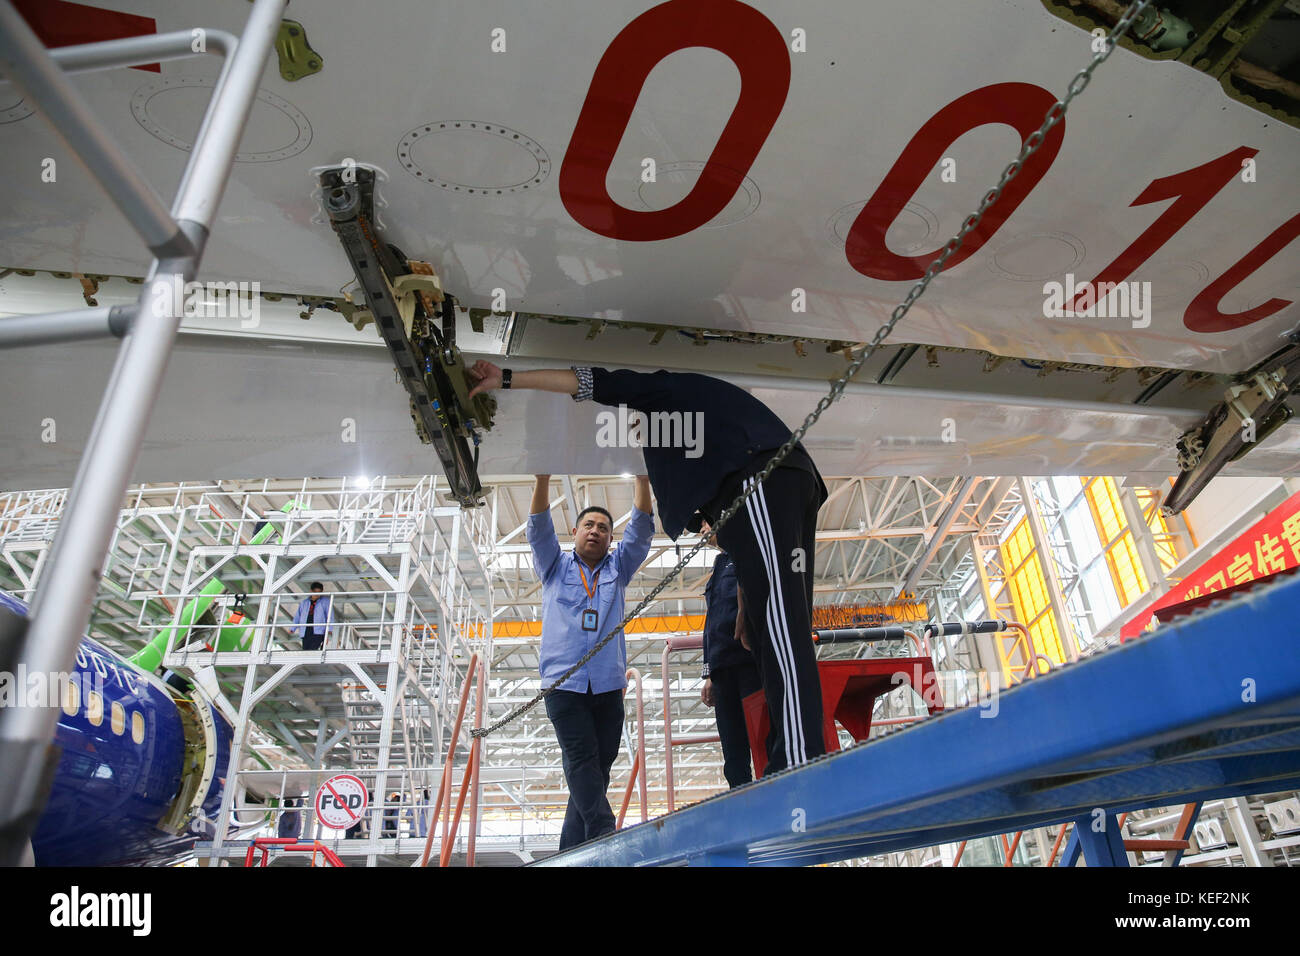 Shanghai, China. 18th Oct, 2017. System installation of the C919 aircraft coded 102 is underway at the assembly line of Shanghai Aircraft Manufacturing Co., Ltd. of the Commercial Aircraft Corporation of China (COMAC) in Shanghai, east China, Oct. 18, 2017. Staff workers completed paint spraying for the jet on Oct. 11. Larger C919 jet is a narrow-body jumbo designed to rival the updated Airbus A320 and the new Boeing B737. Credit: Ding Ting/Xinhua/Alamy Live News Stock Photo